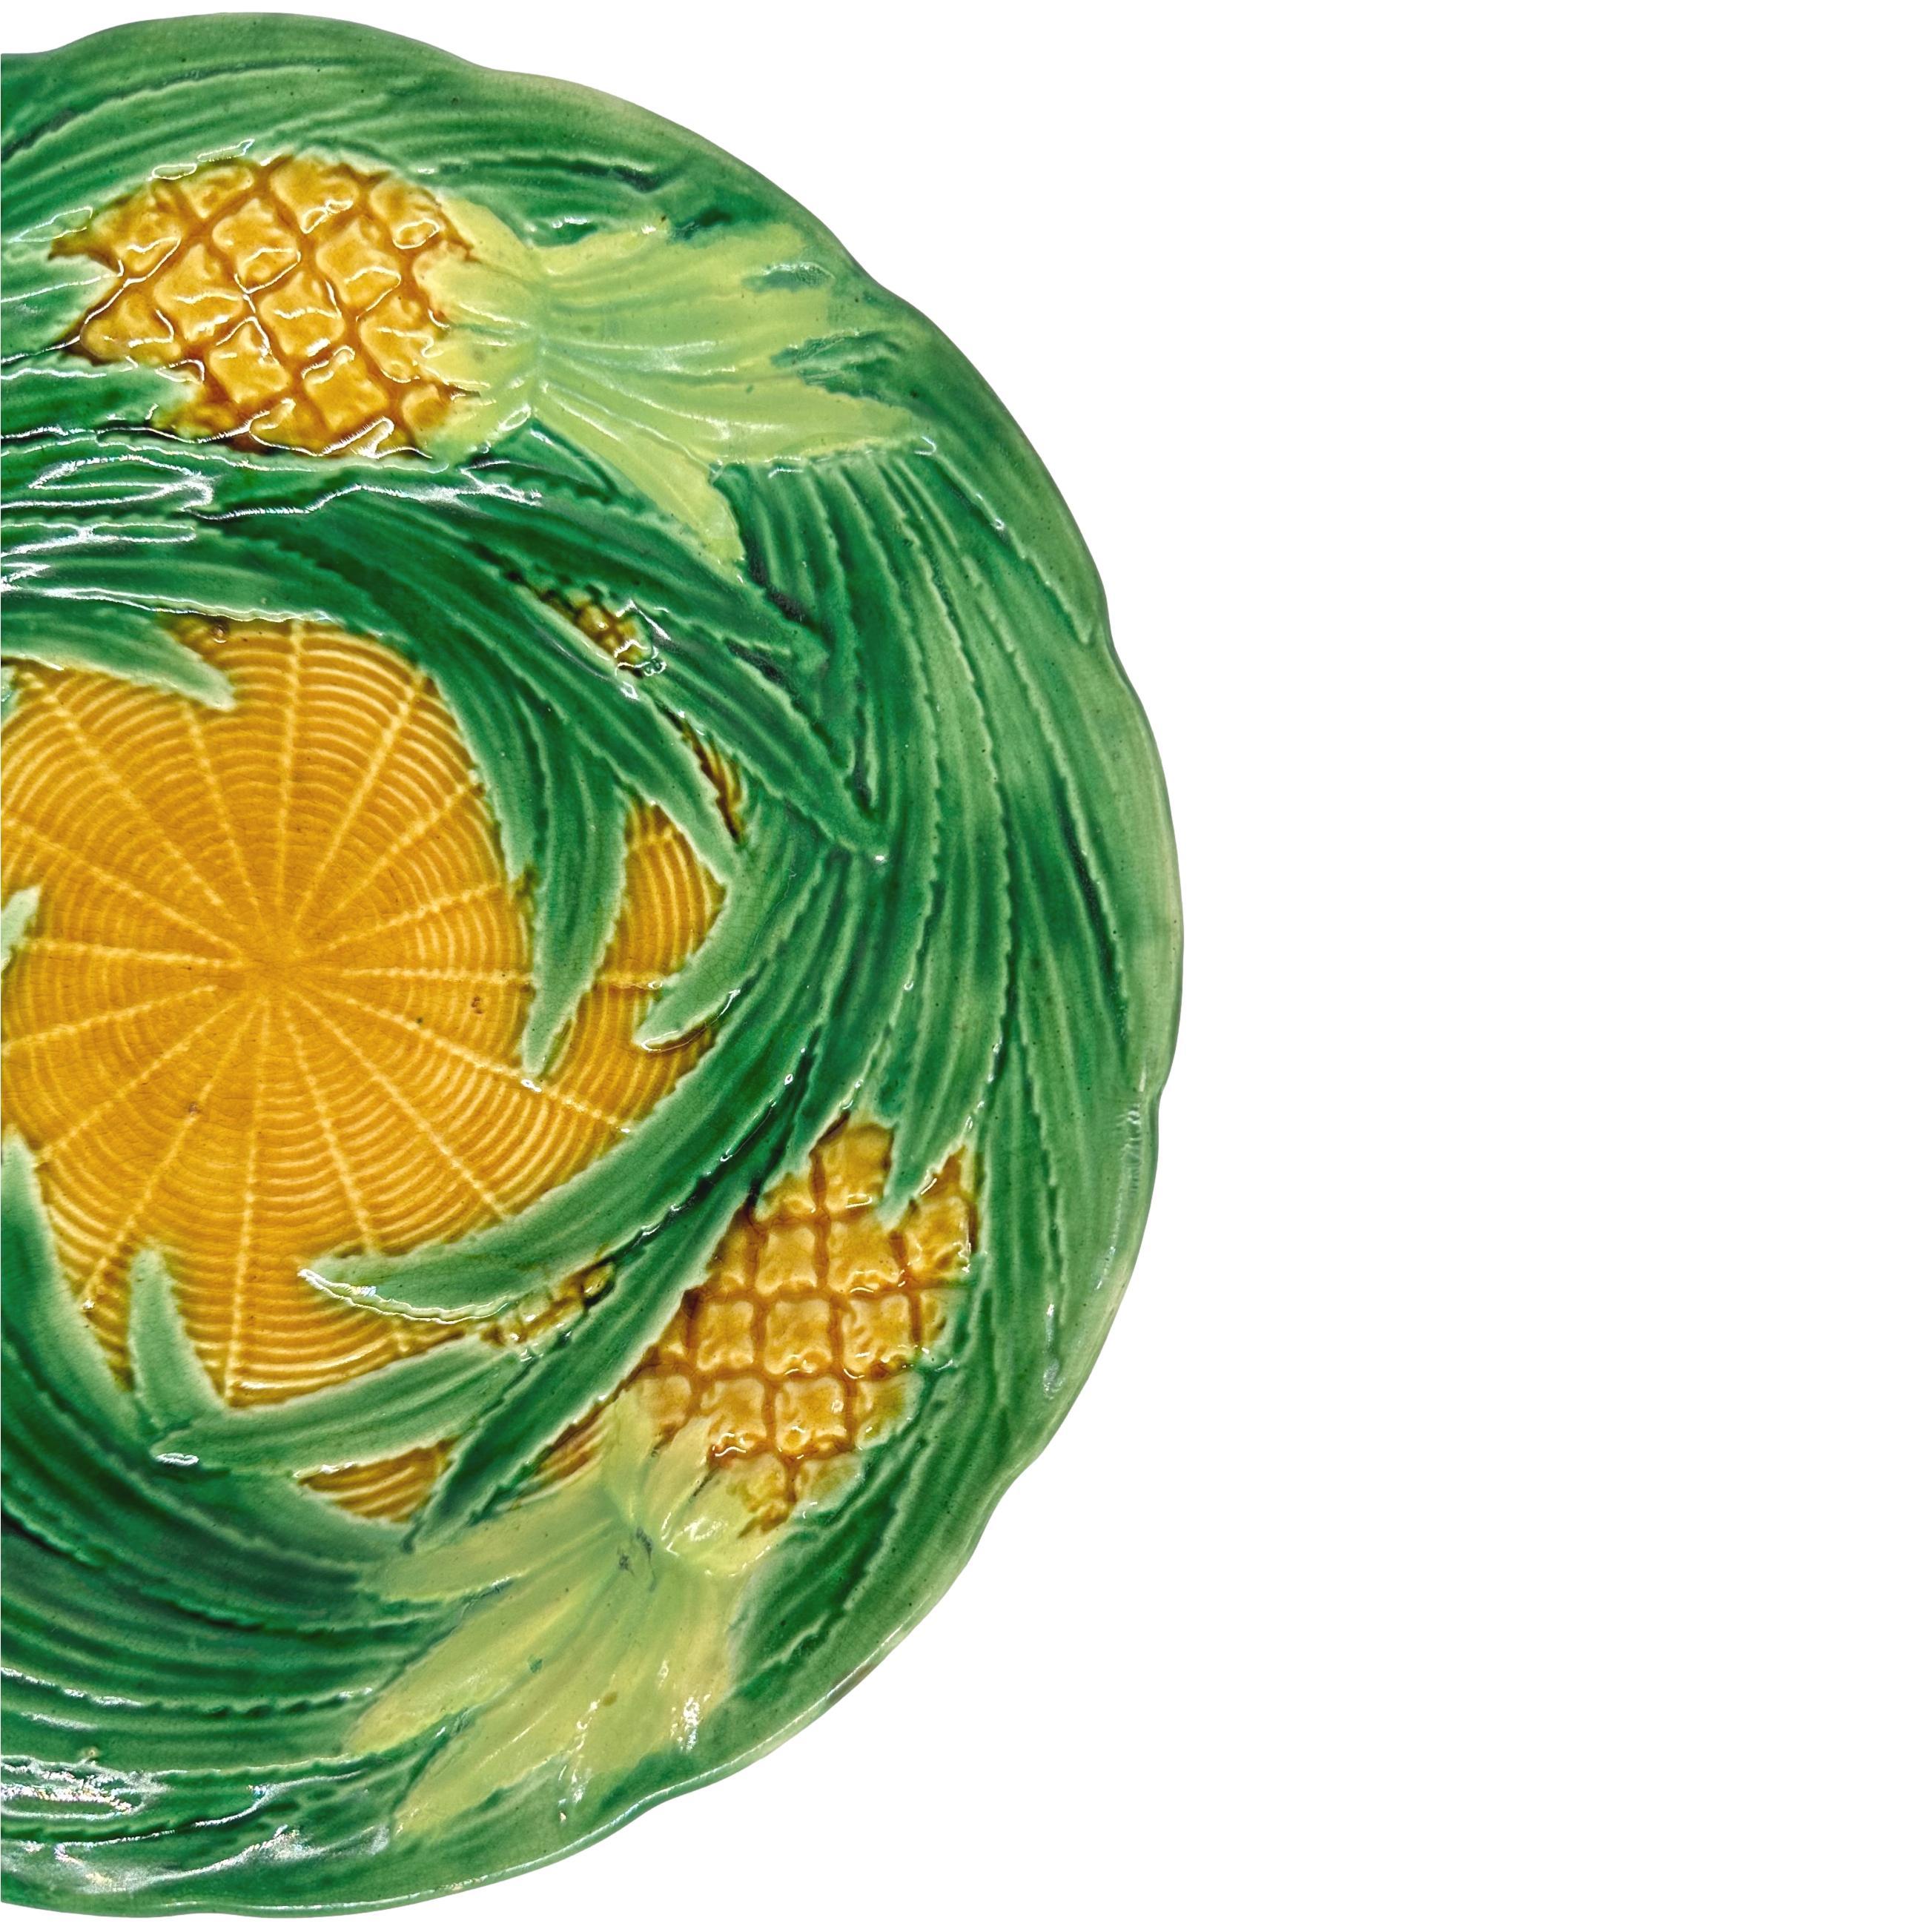 Victorian A George Jones Majolica Pineapples on Basketweave Plate, English, ca. 1870 For Sale